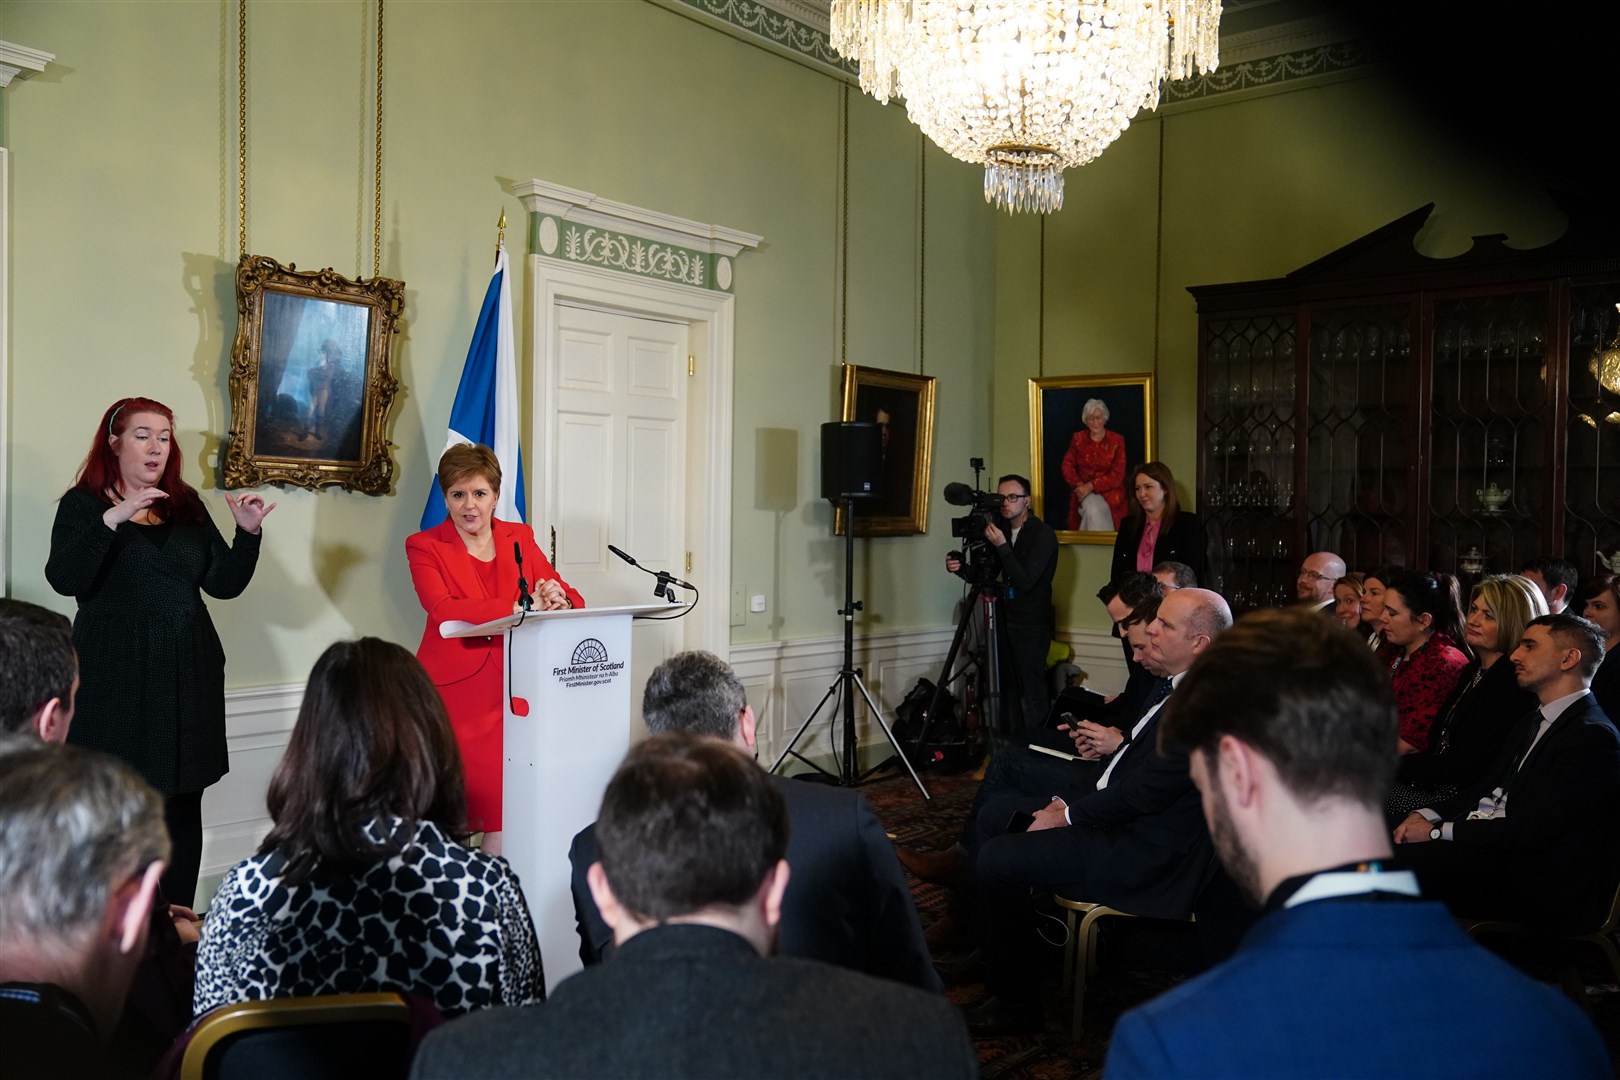 Nicola Sturgeon speaks during a press conference at Bute House in Edinburgh where she announced she will stand down as First Minister (Jane Barlow/PA)